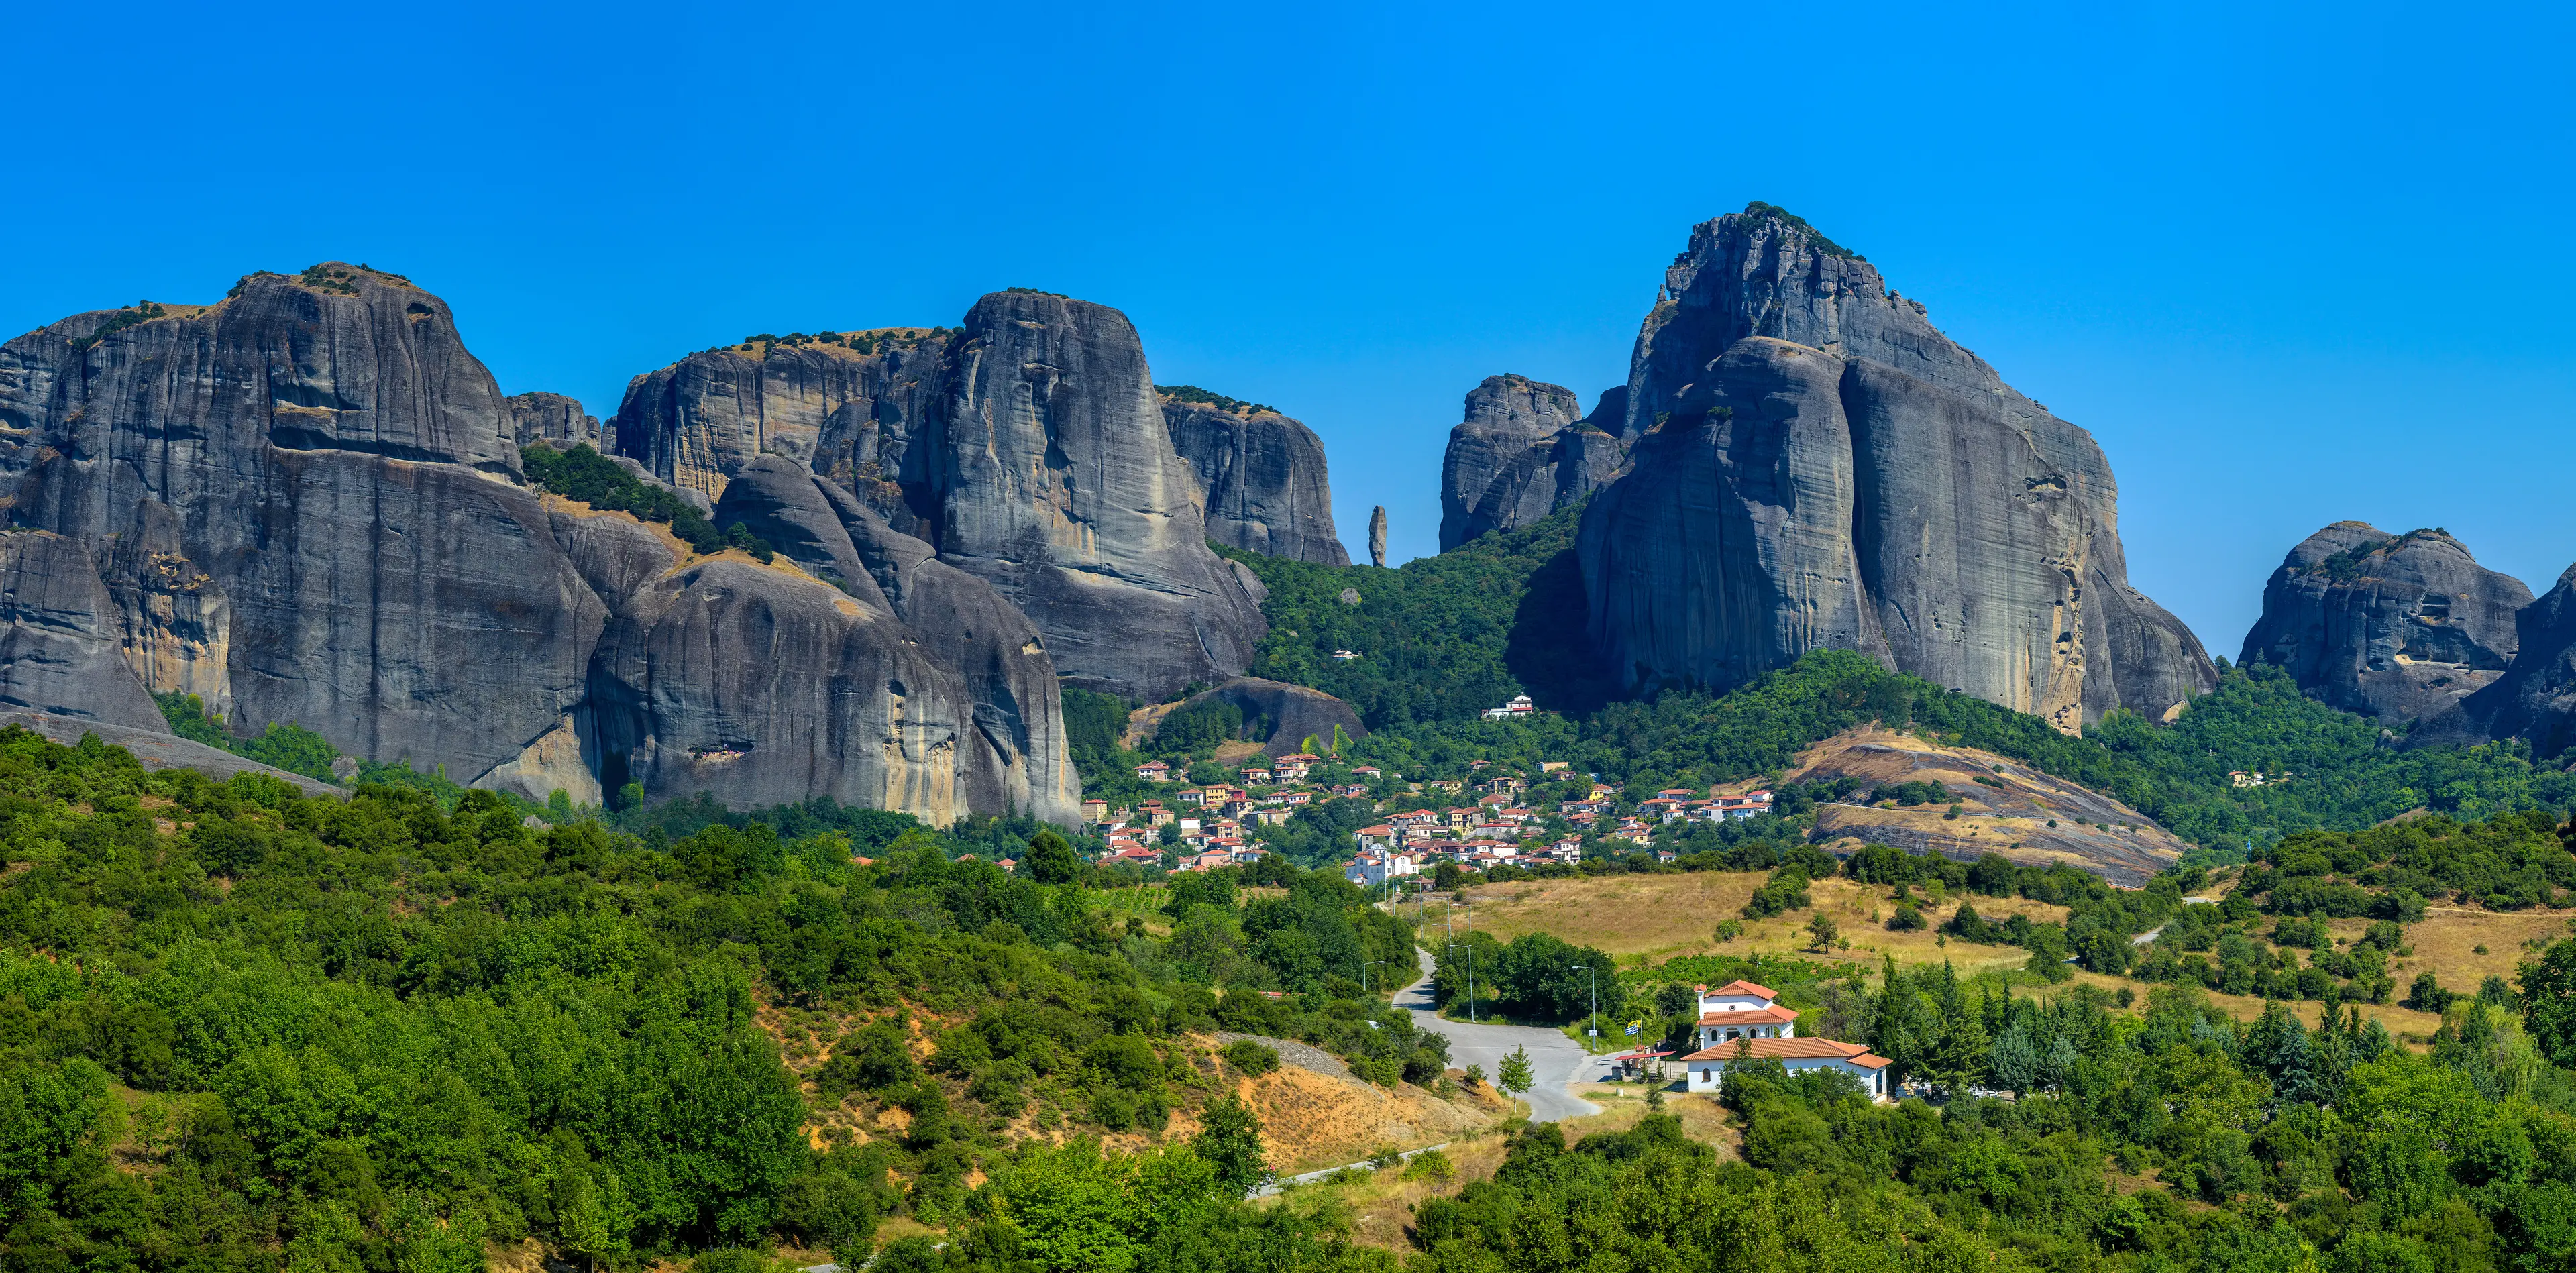 The rock formations of Meteora rising behind the town